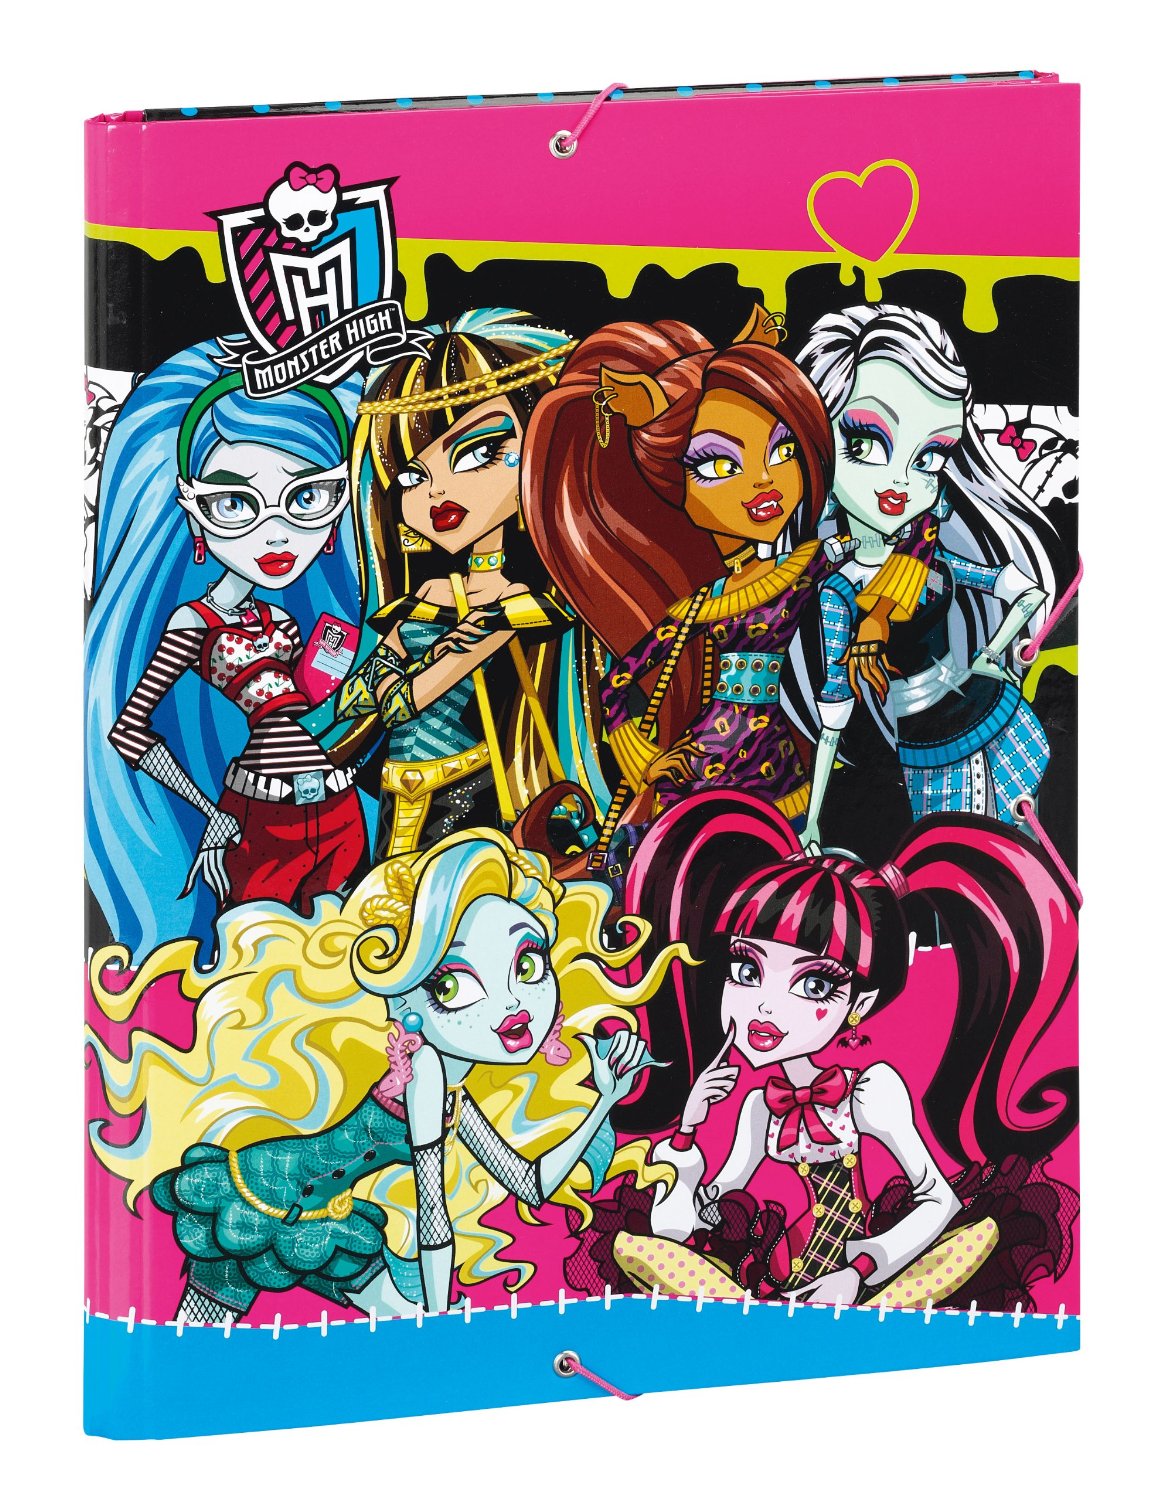 MONSTER HIGH Pochette porte-documents Personnages